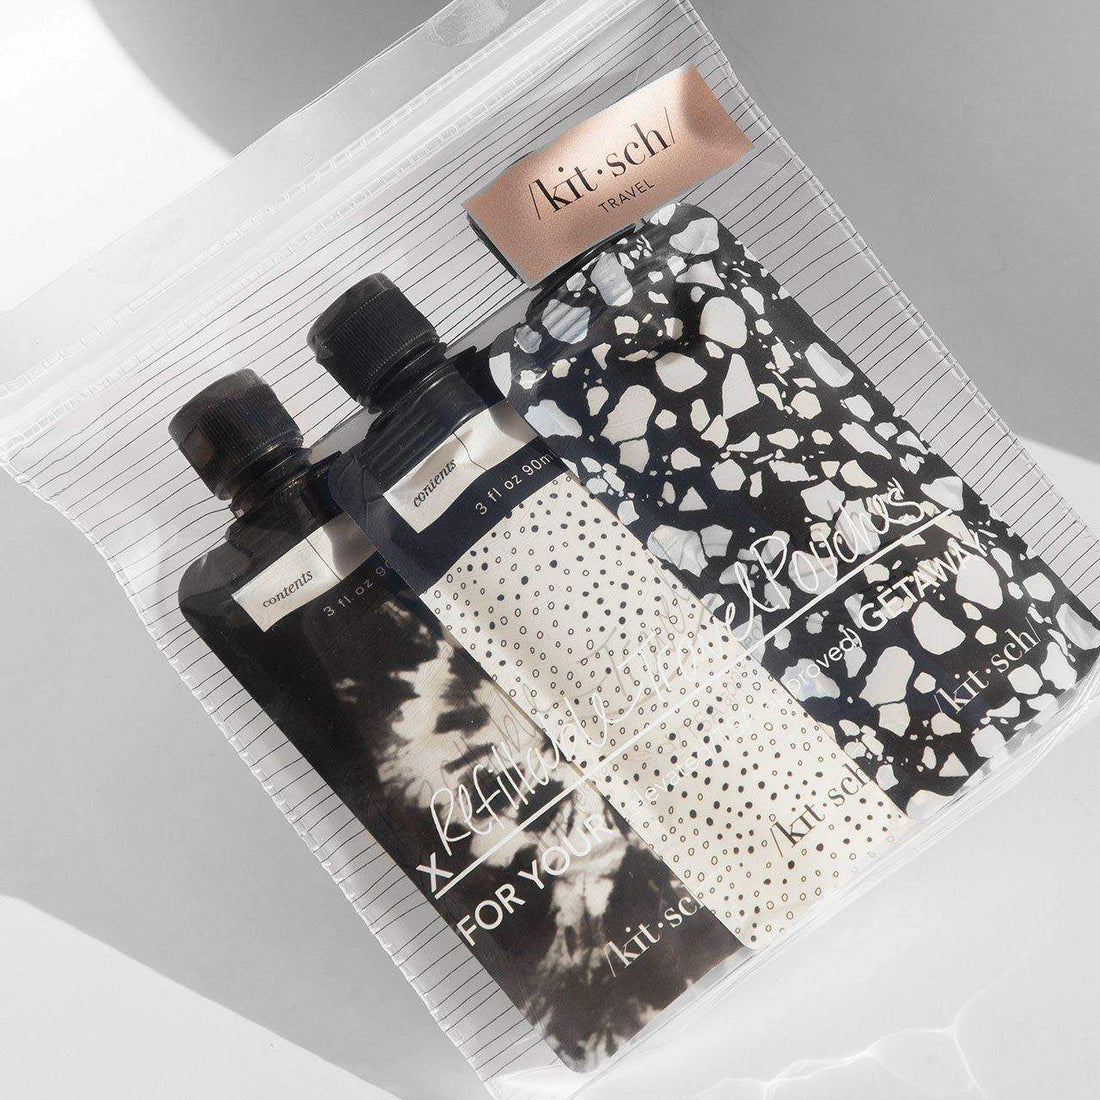 Refillable Travel Pouch 3pc set - Black & Ivory Cleanse Cleanse 